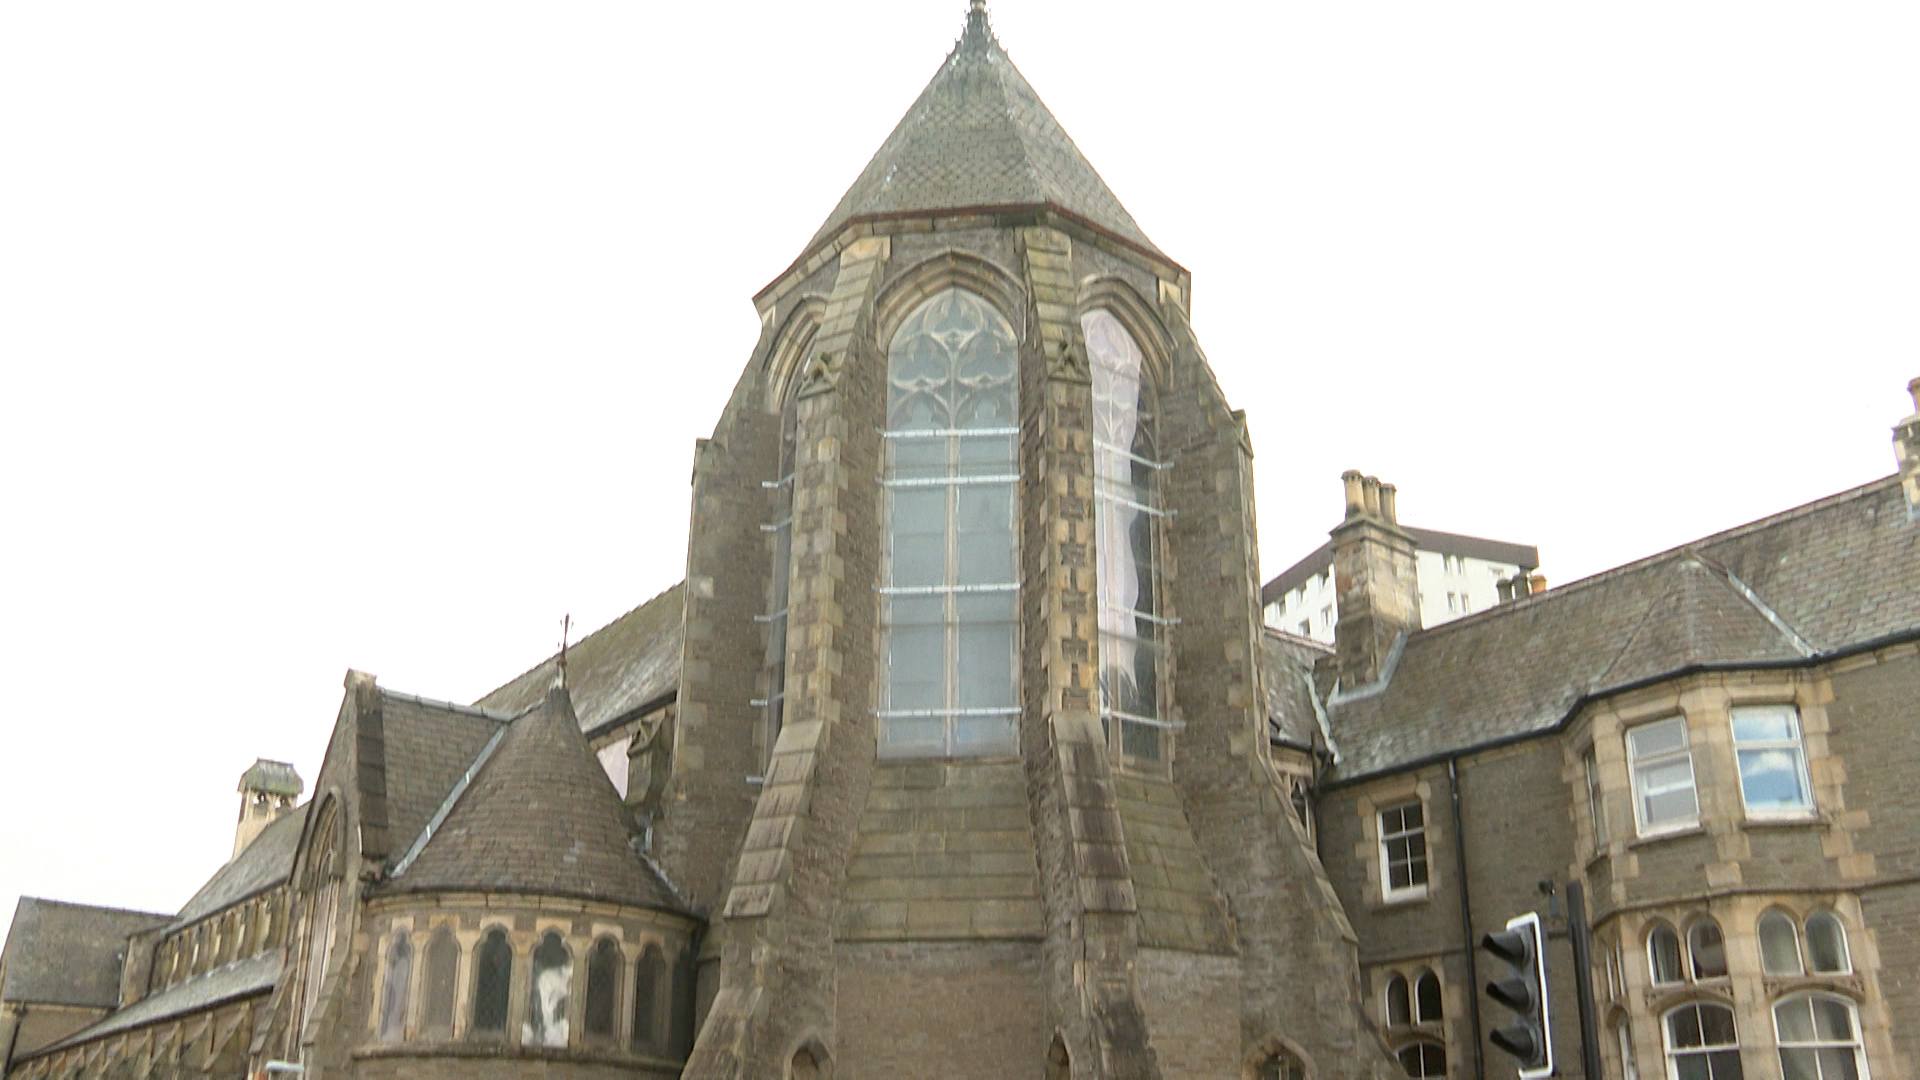 After a century and a half, stonework at St Mary's has started to crumble away